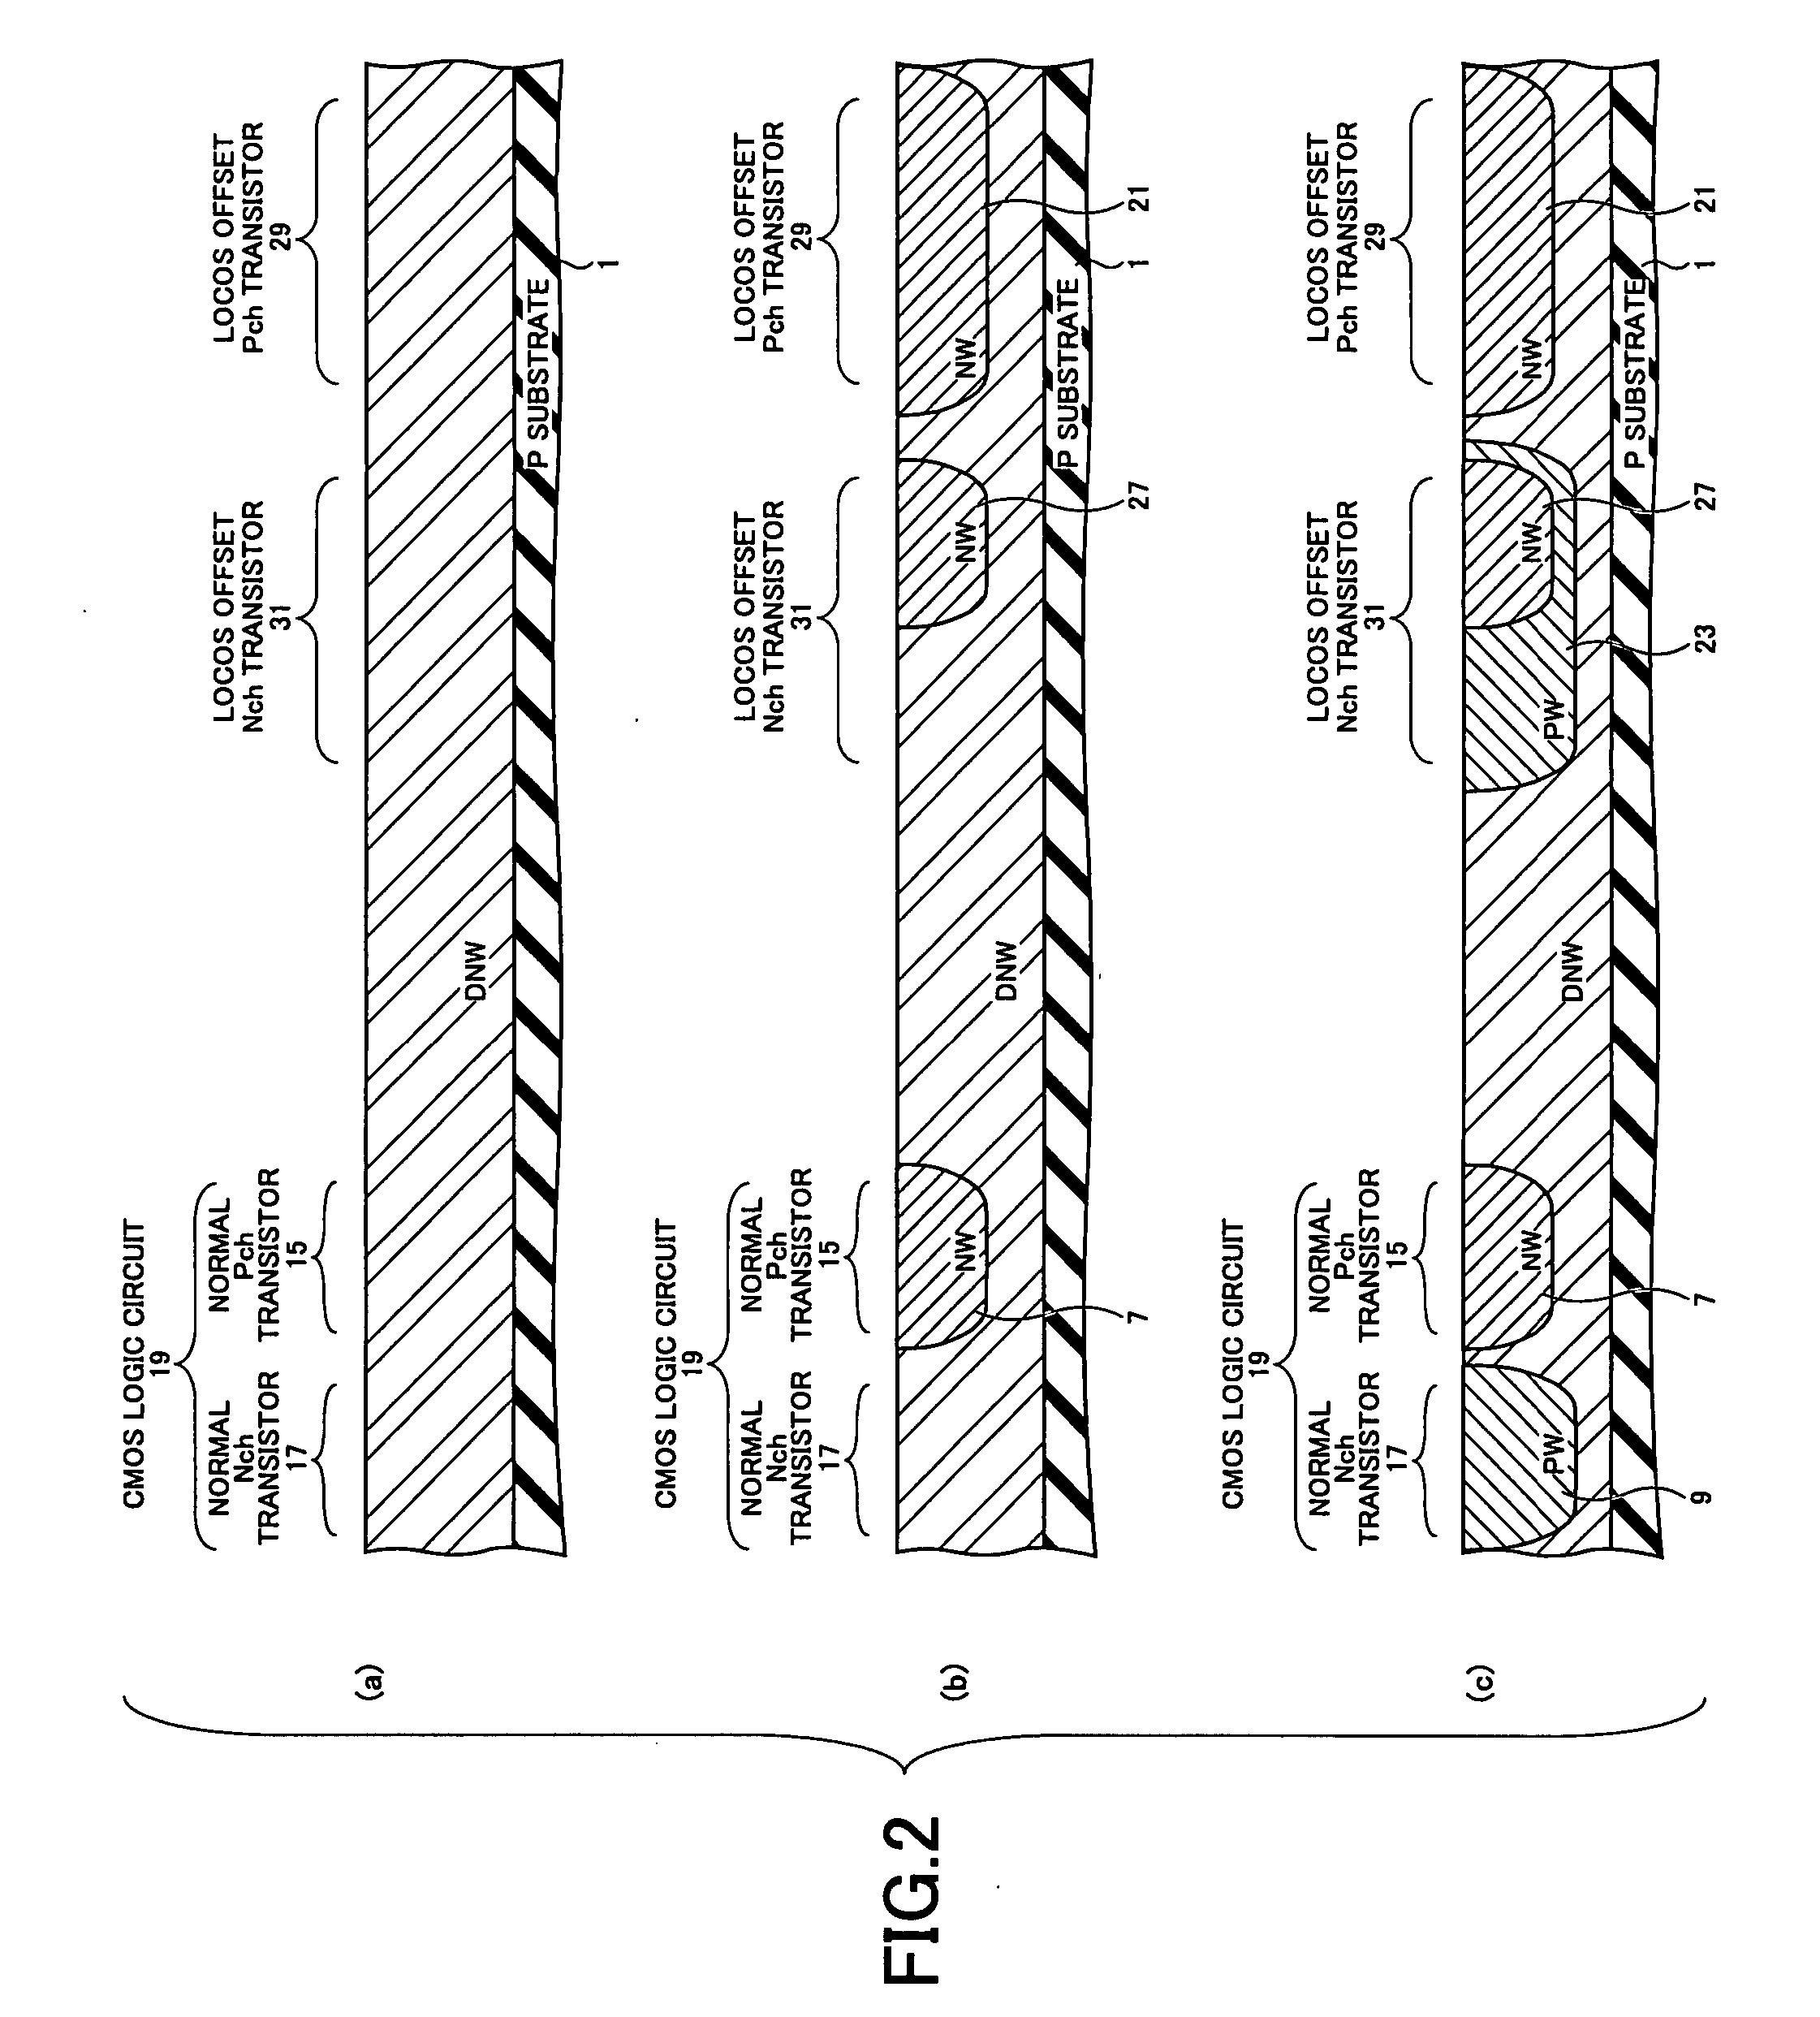 Semiconductor device including MOS transistor having LOCOS offset structure and manufacturing method thereof